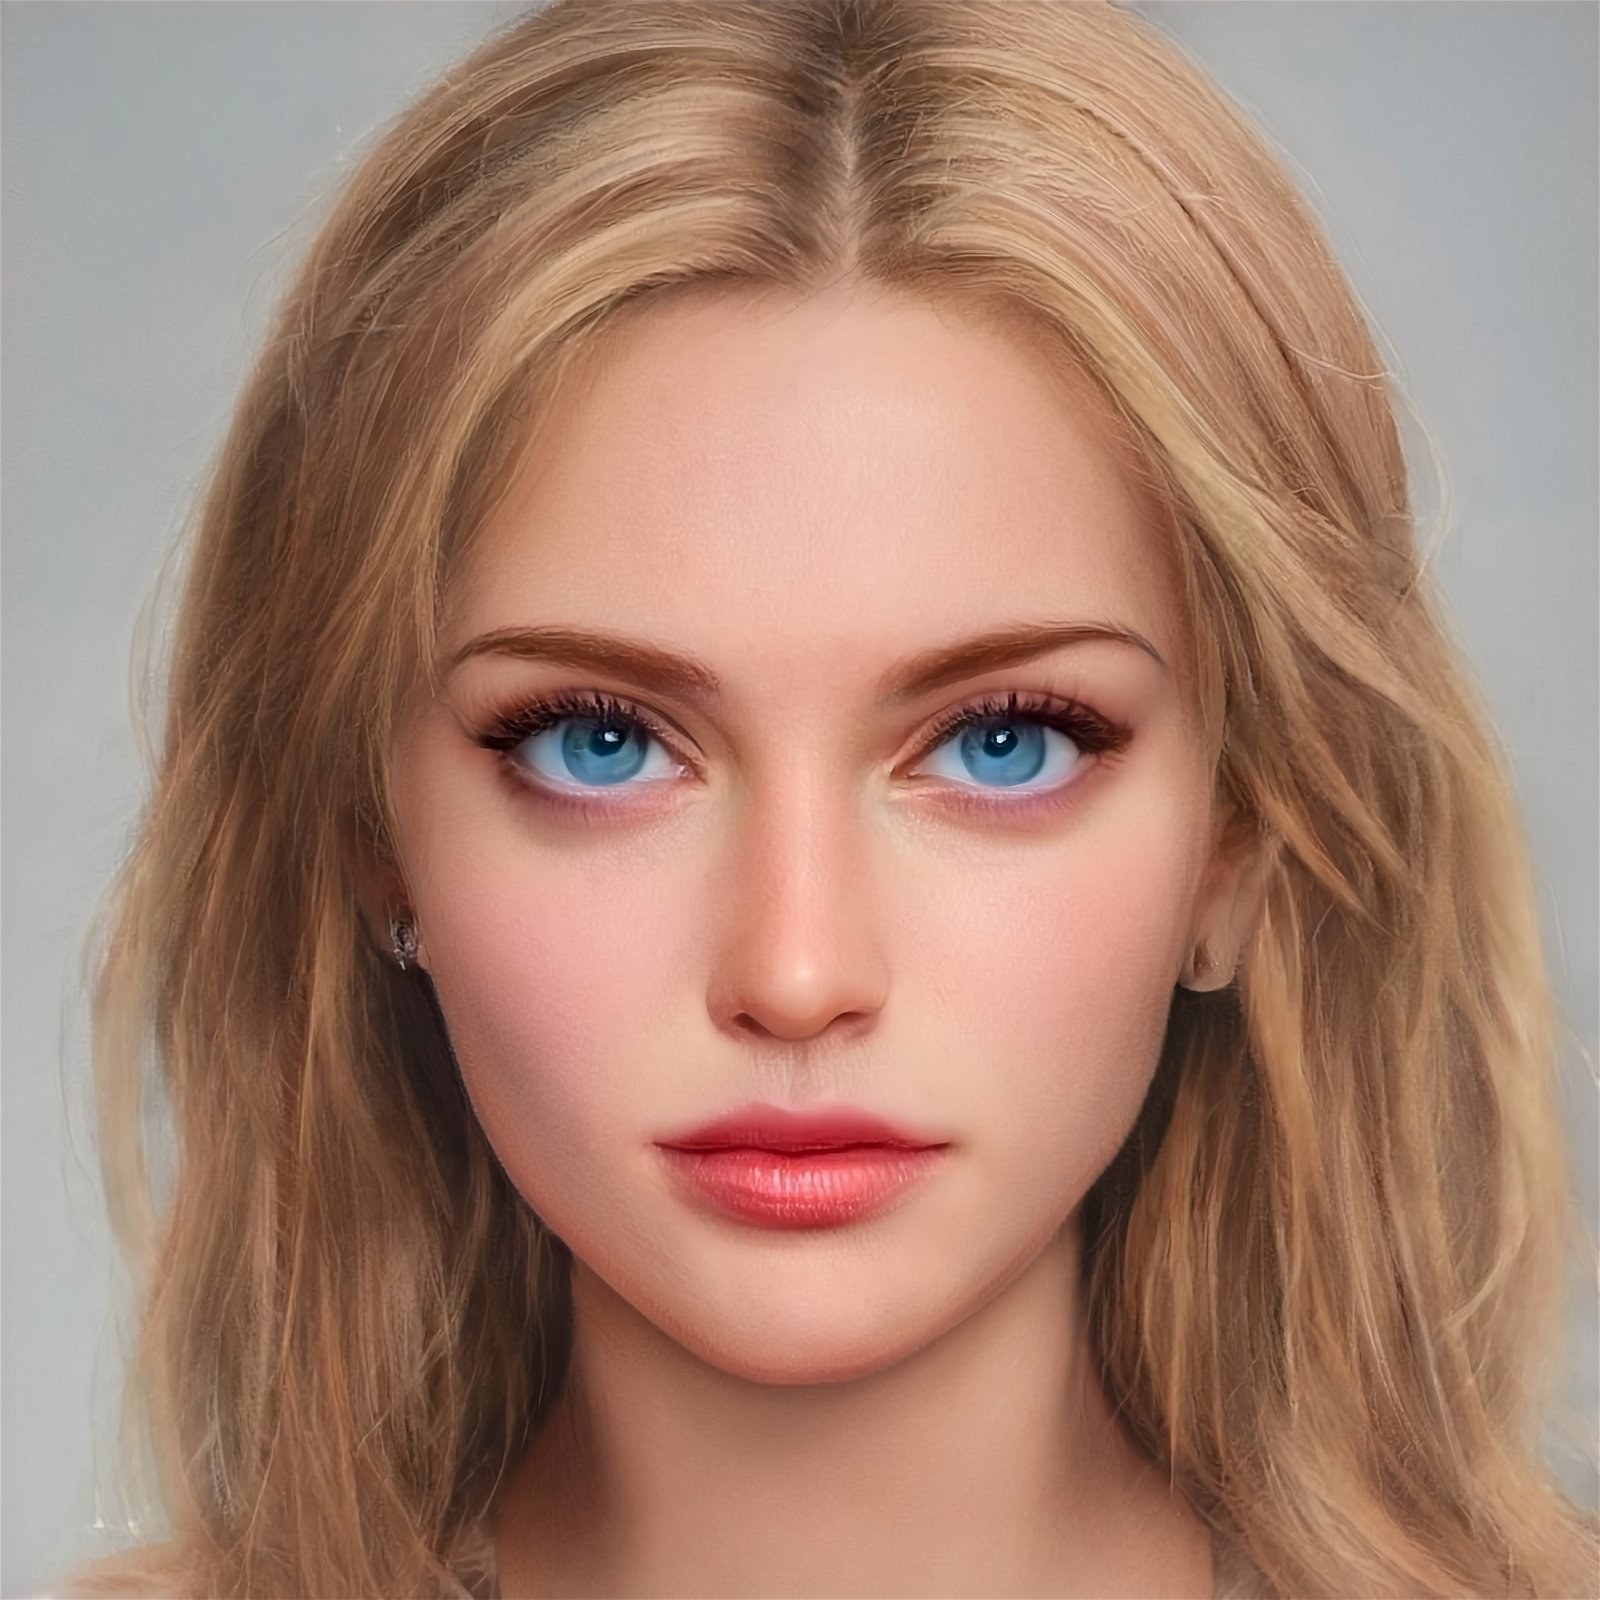 a girl with blonde hair and blue eyes